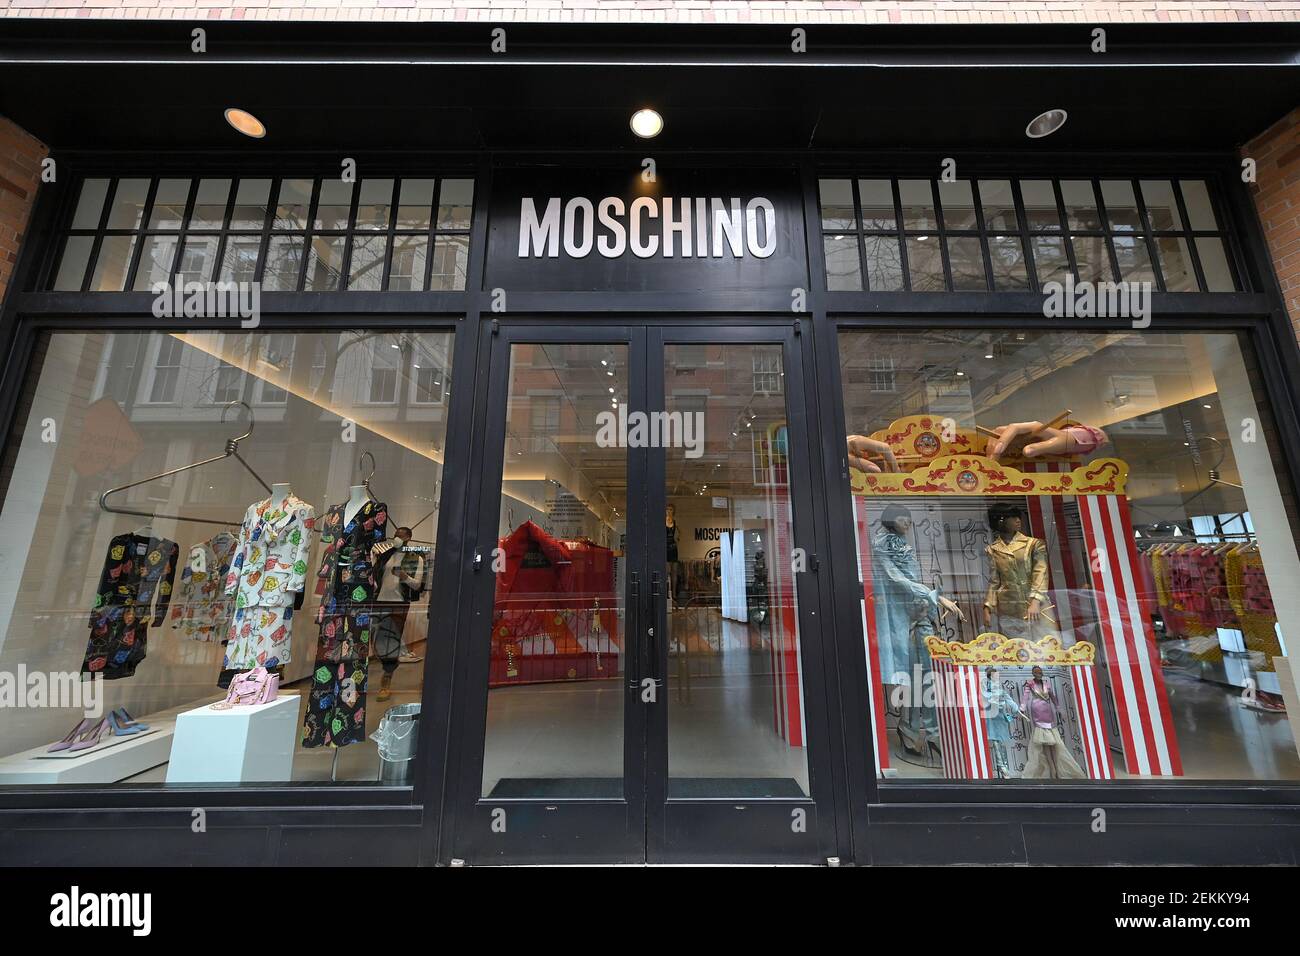 Italian luxury brand Moschino name above the front entrance of its retail  store in the Soho neighborhood of New York, NY, February 23, 2021. British  and Italian Fashion Week shows are underway